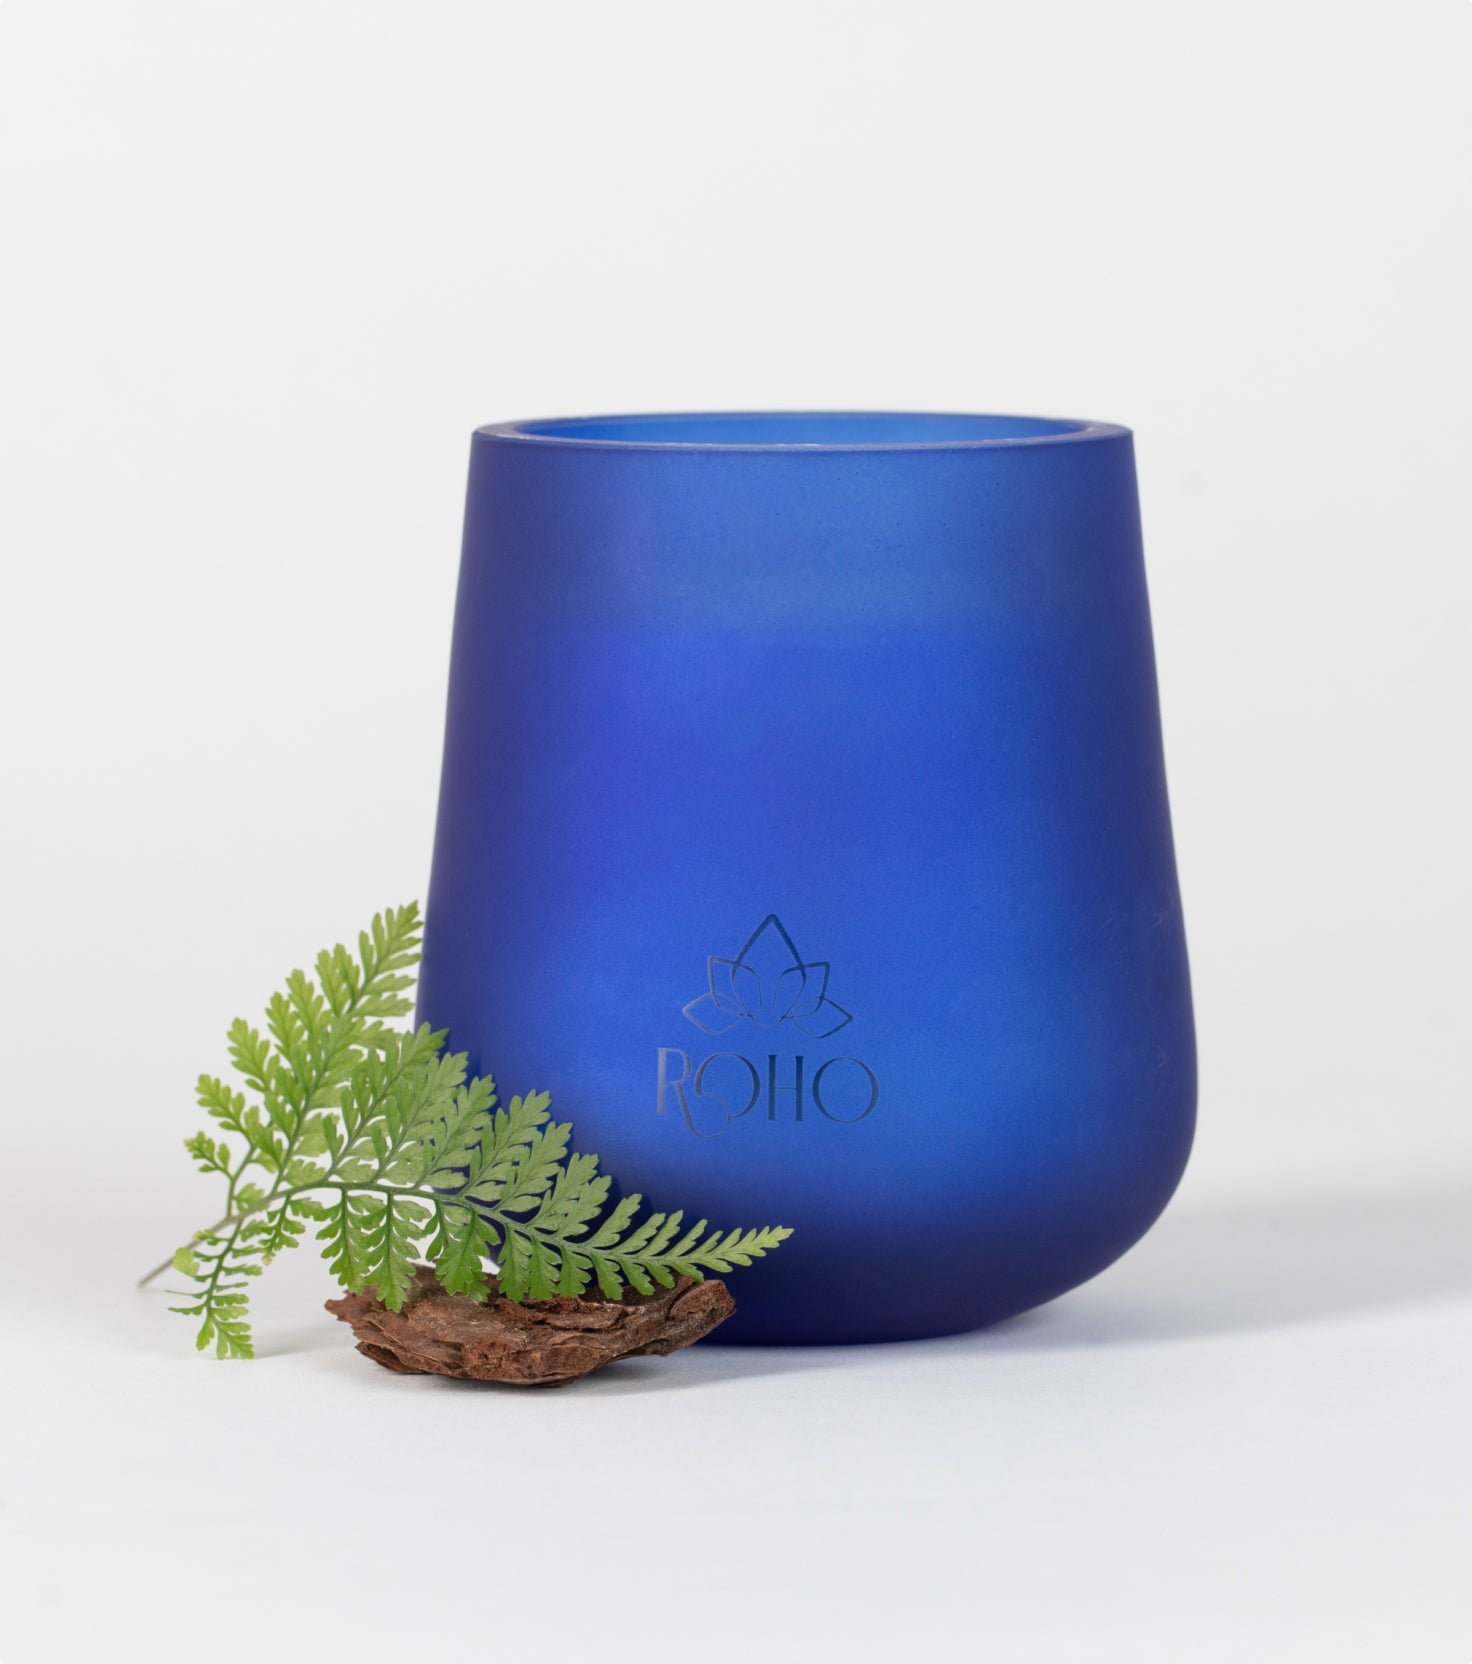 Mediterranean Forest Scented Candle - ROHO AIRDECO